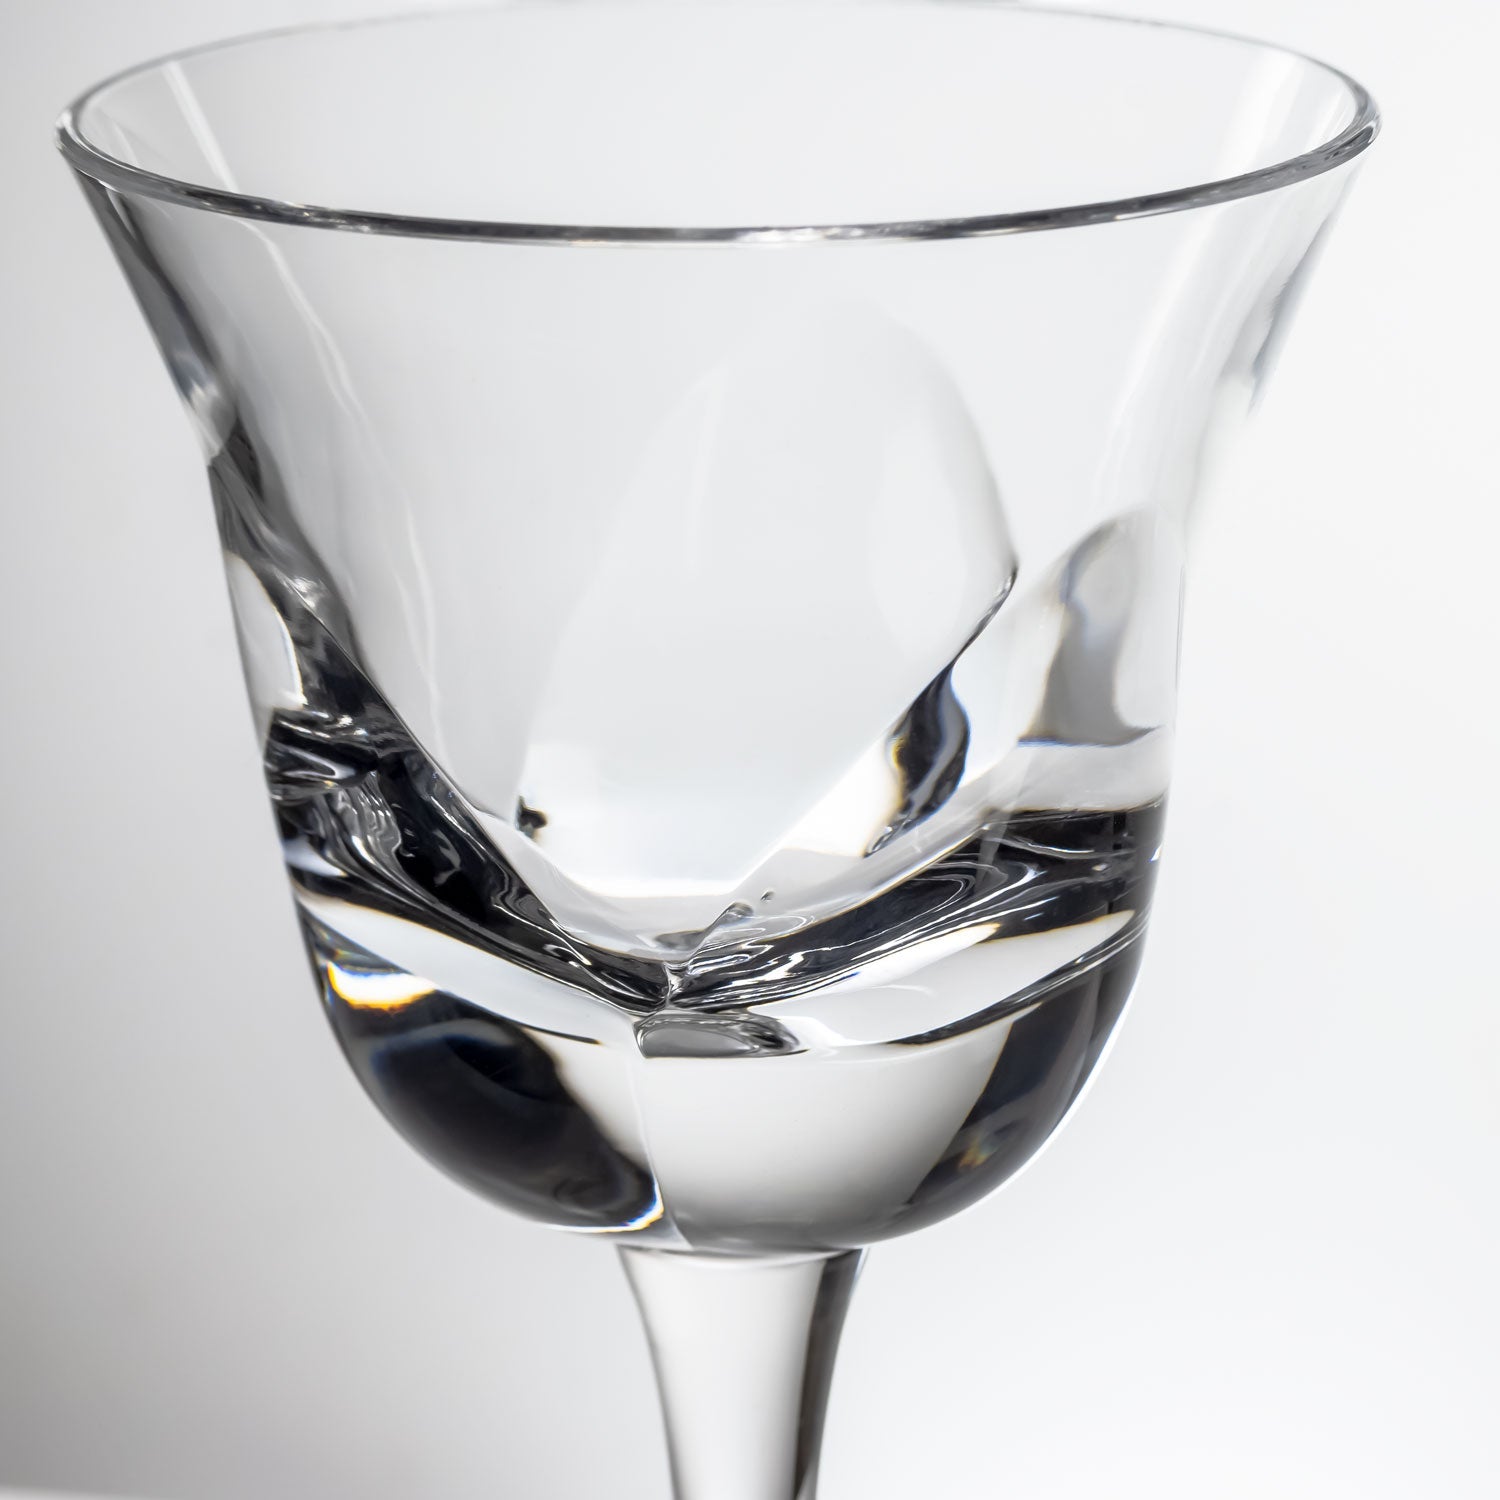 10-ounce clear acrylic wine glass in the Fiori collection by Merritt Designs. Detailed view on white background